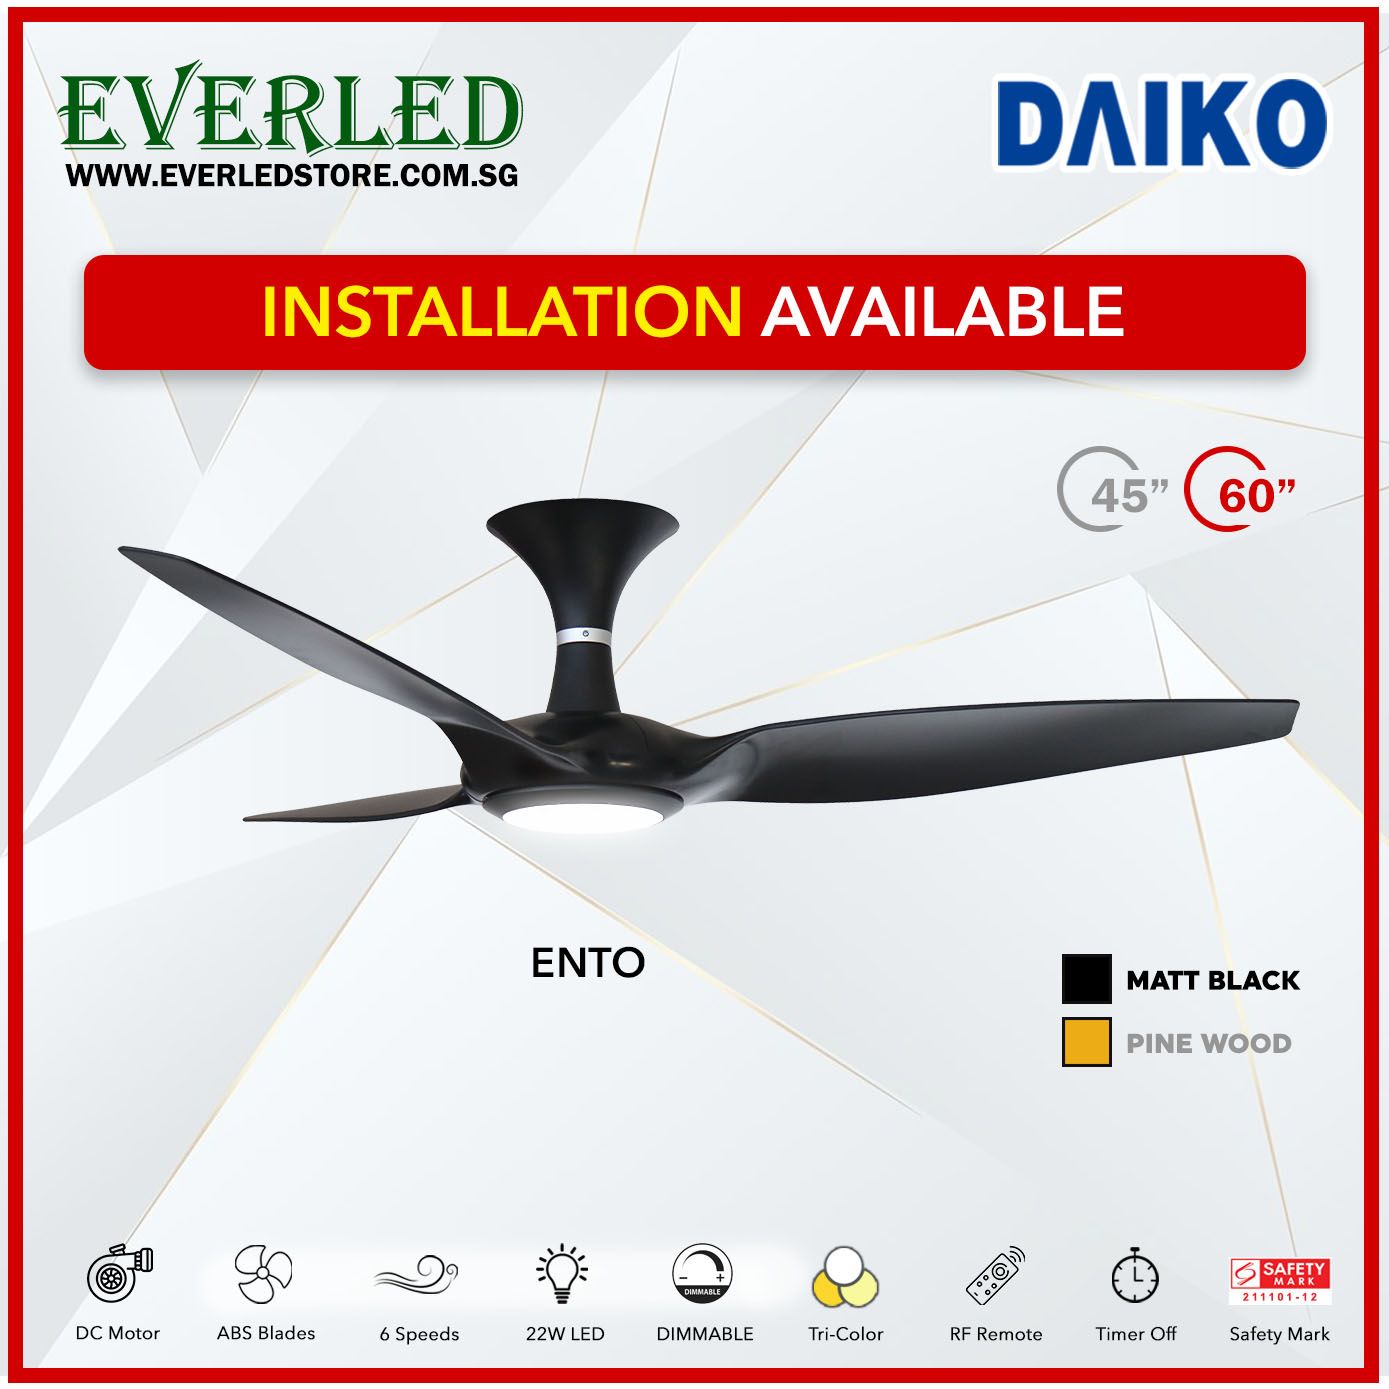 Daiko DC Ento 45"/60" with Dimmable Tri-color LED (Inverter DC Fan)